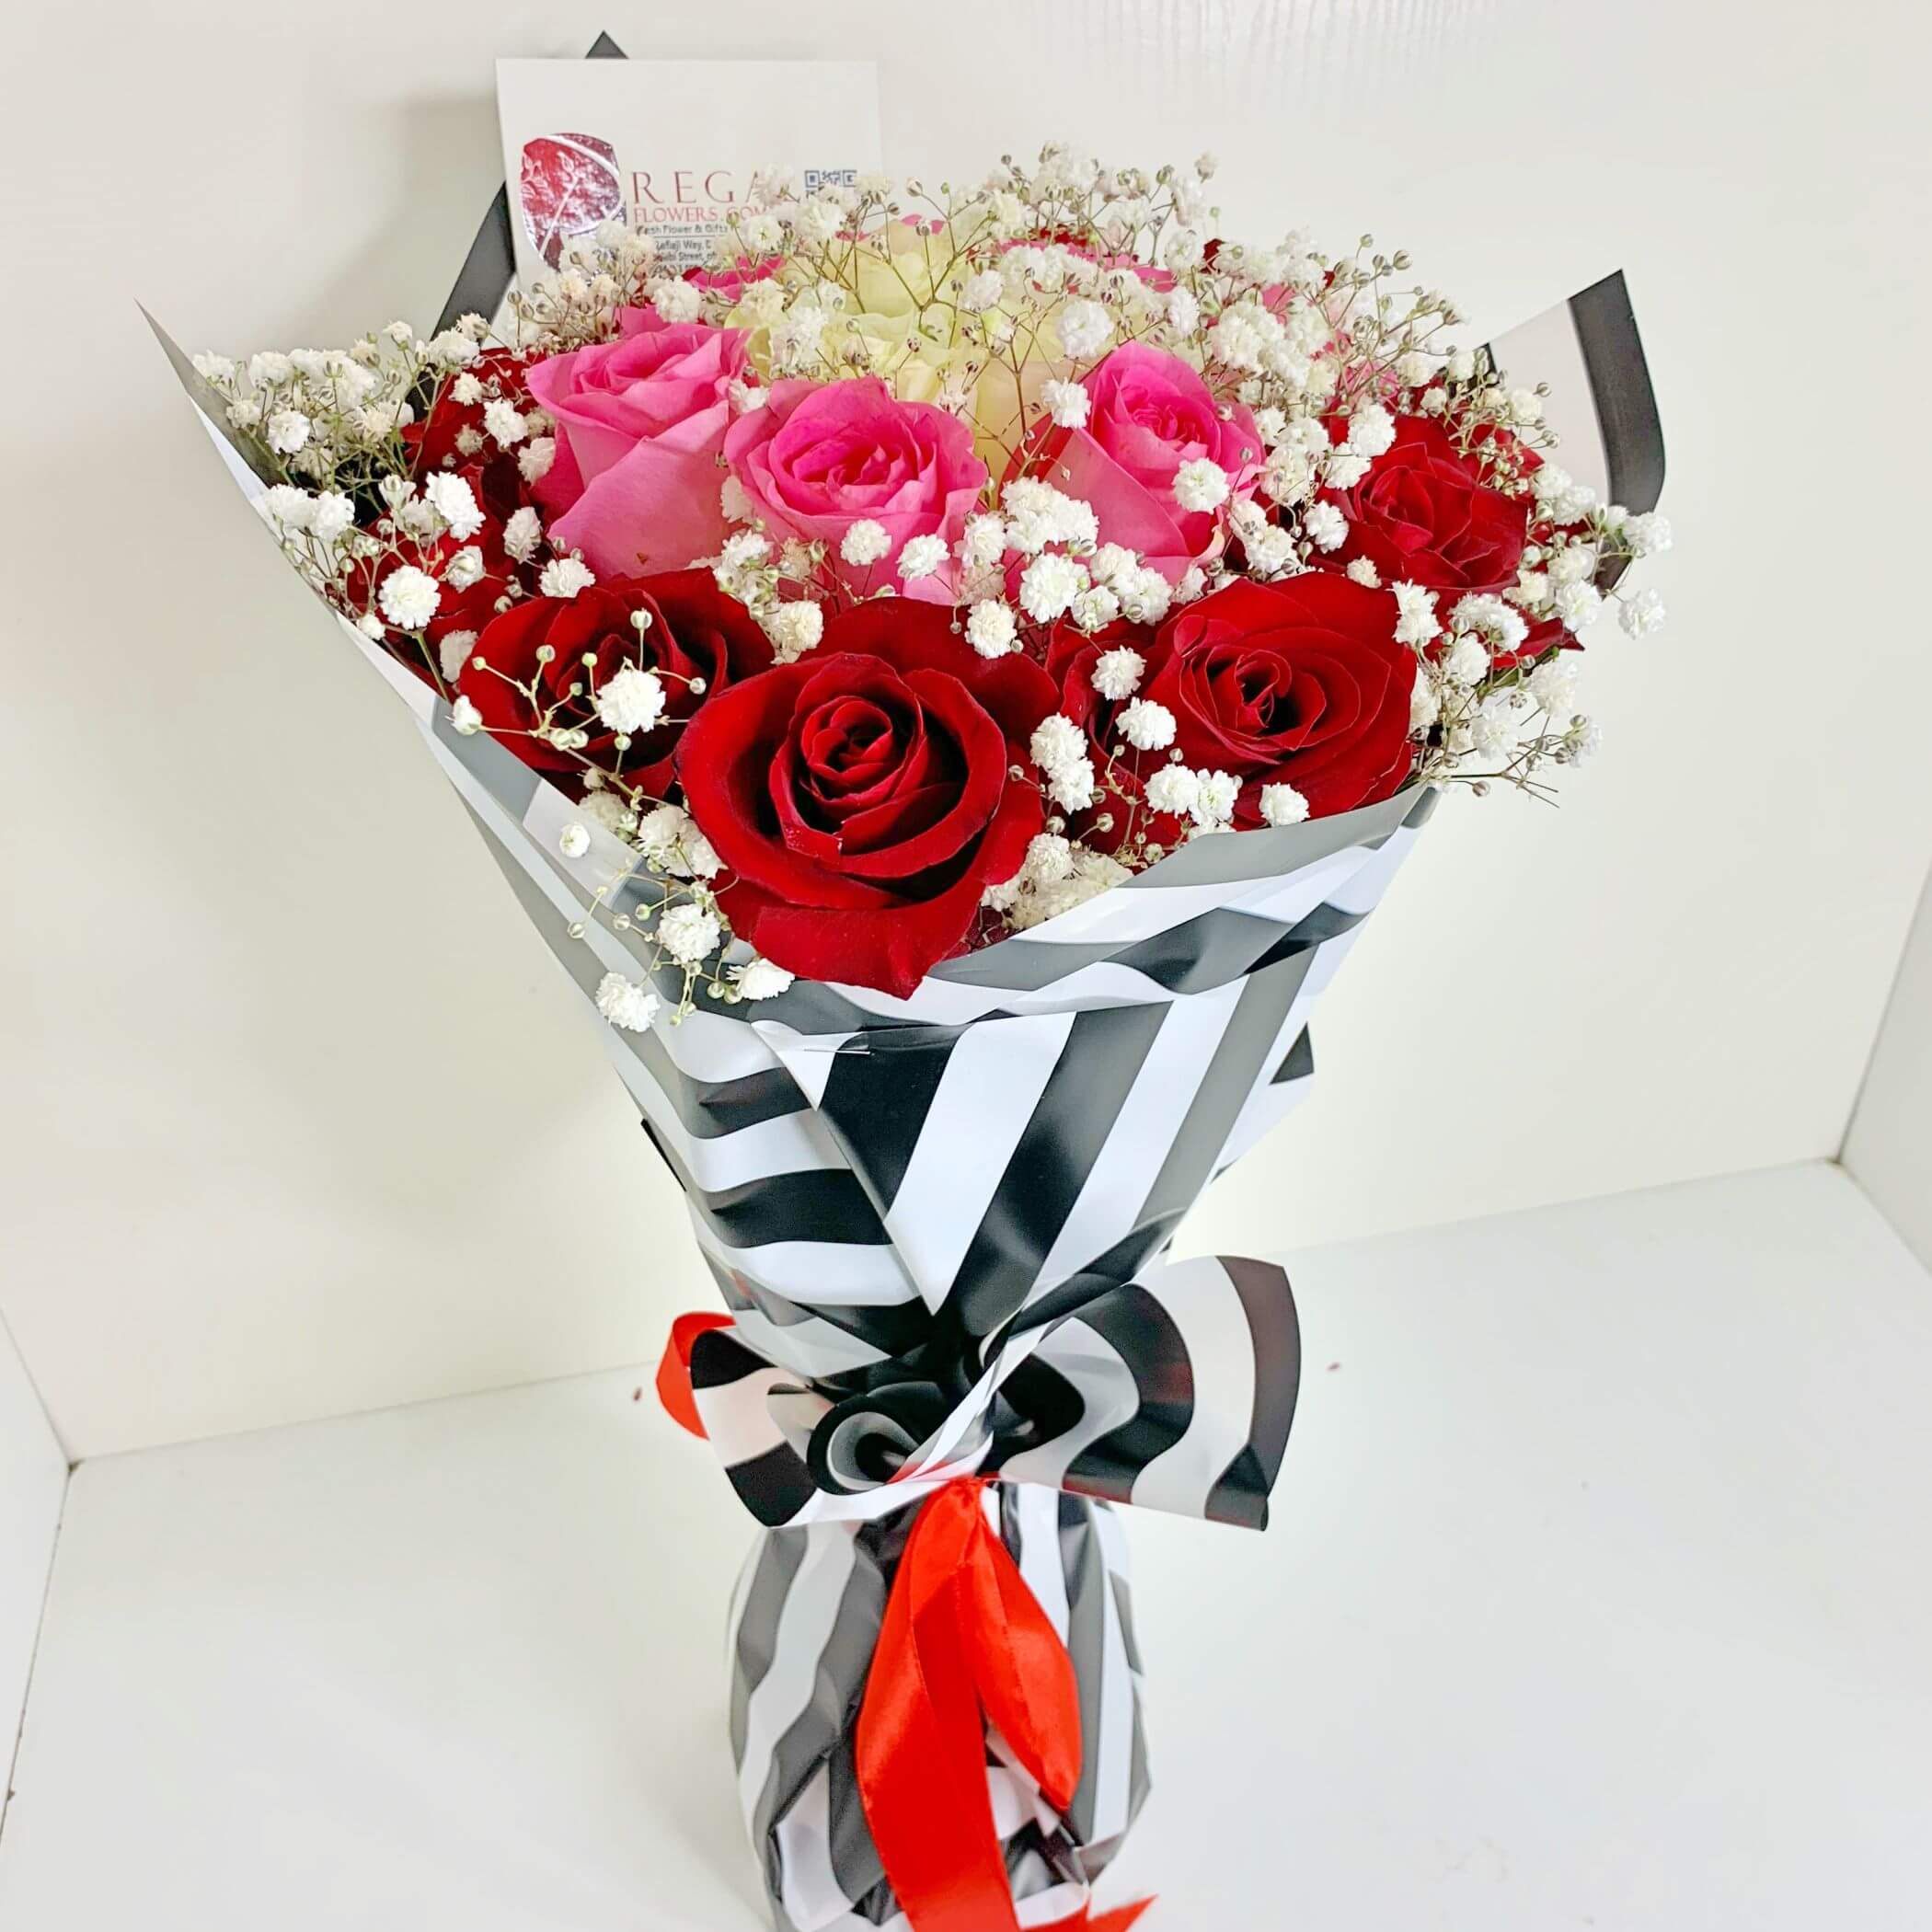 Red Roses, Pink Roses and White Roses with Gypso and Guylian Chocolate, Flower store, bouquet of Flowers for her, Birthday Flowers, Same day flowers delivery company in Lagos